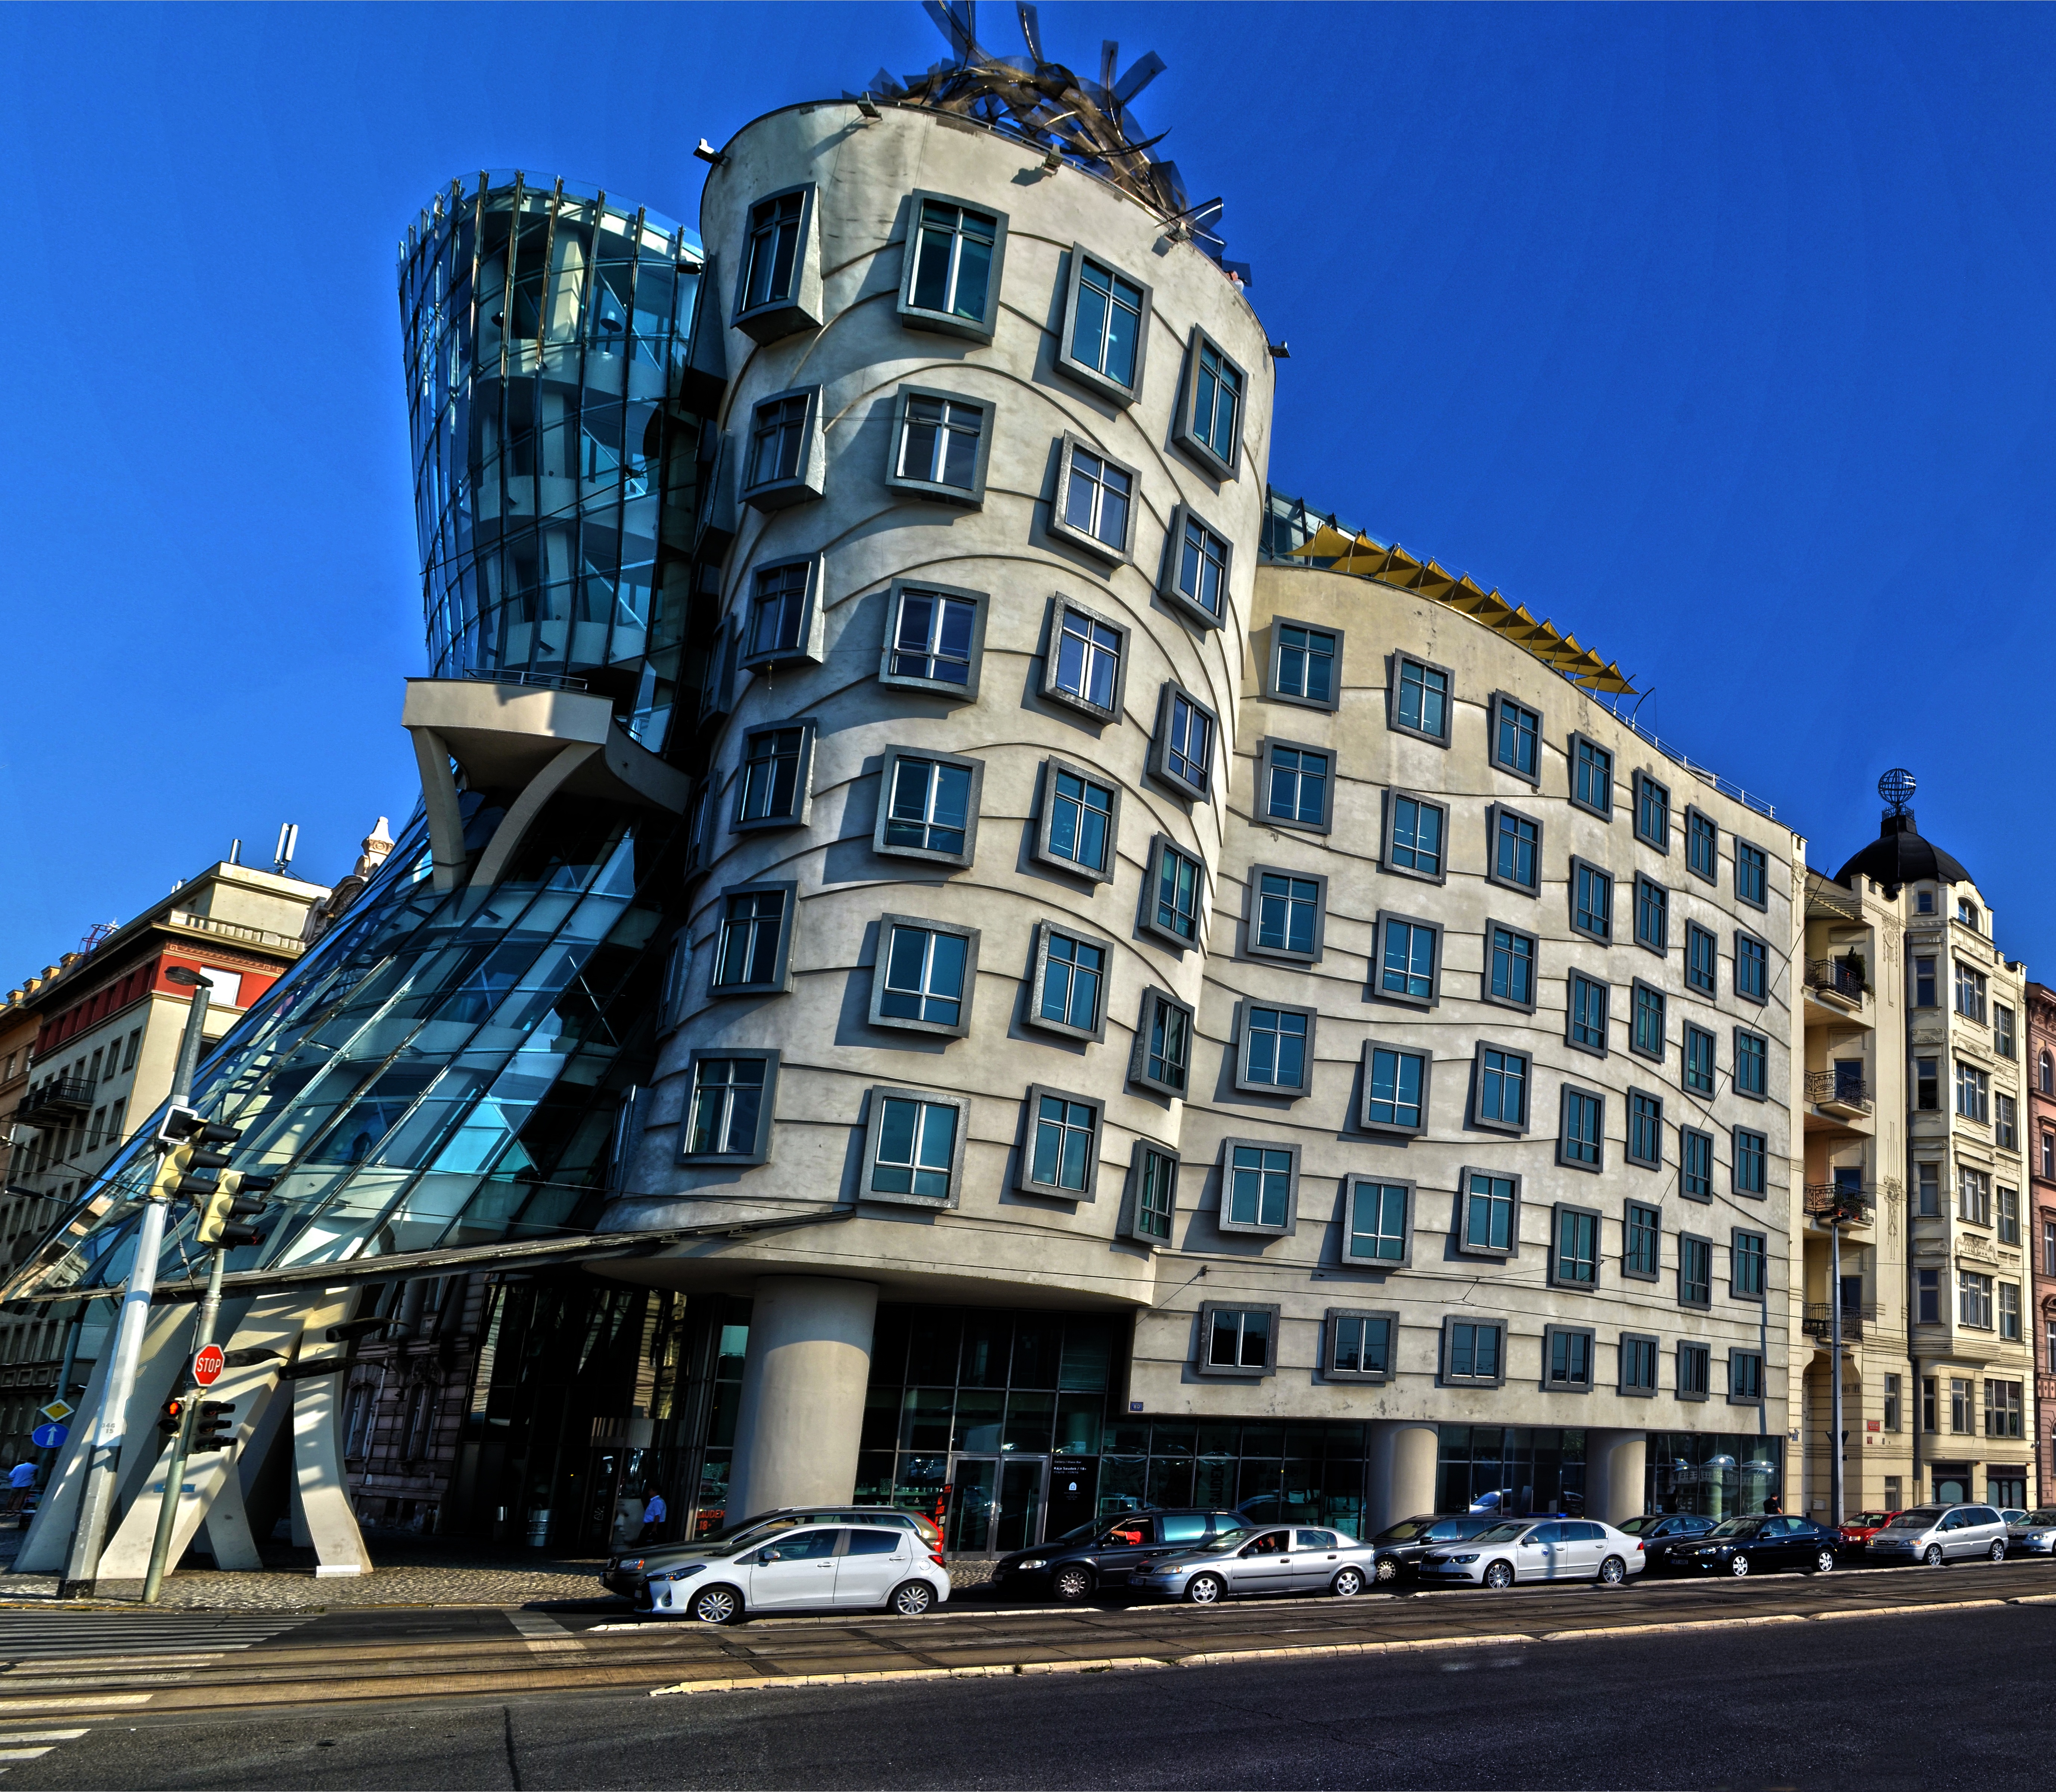 File:The Dancing House in Prague.jpg - Wikimedia Commons